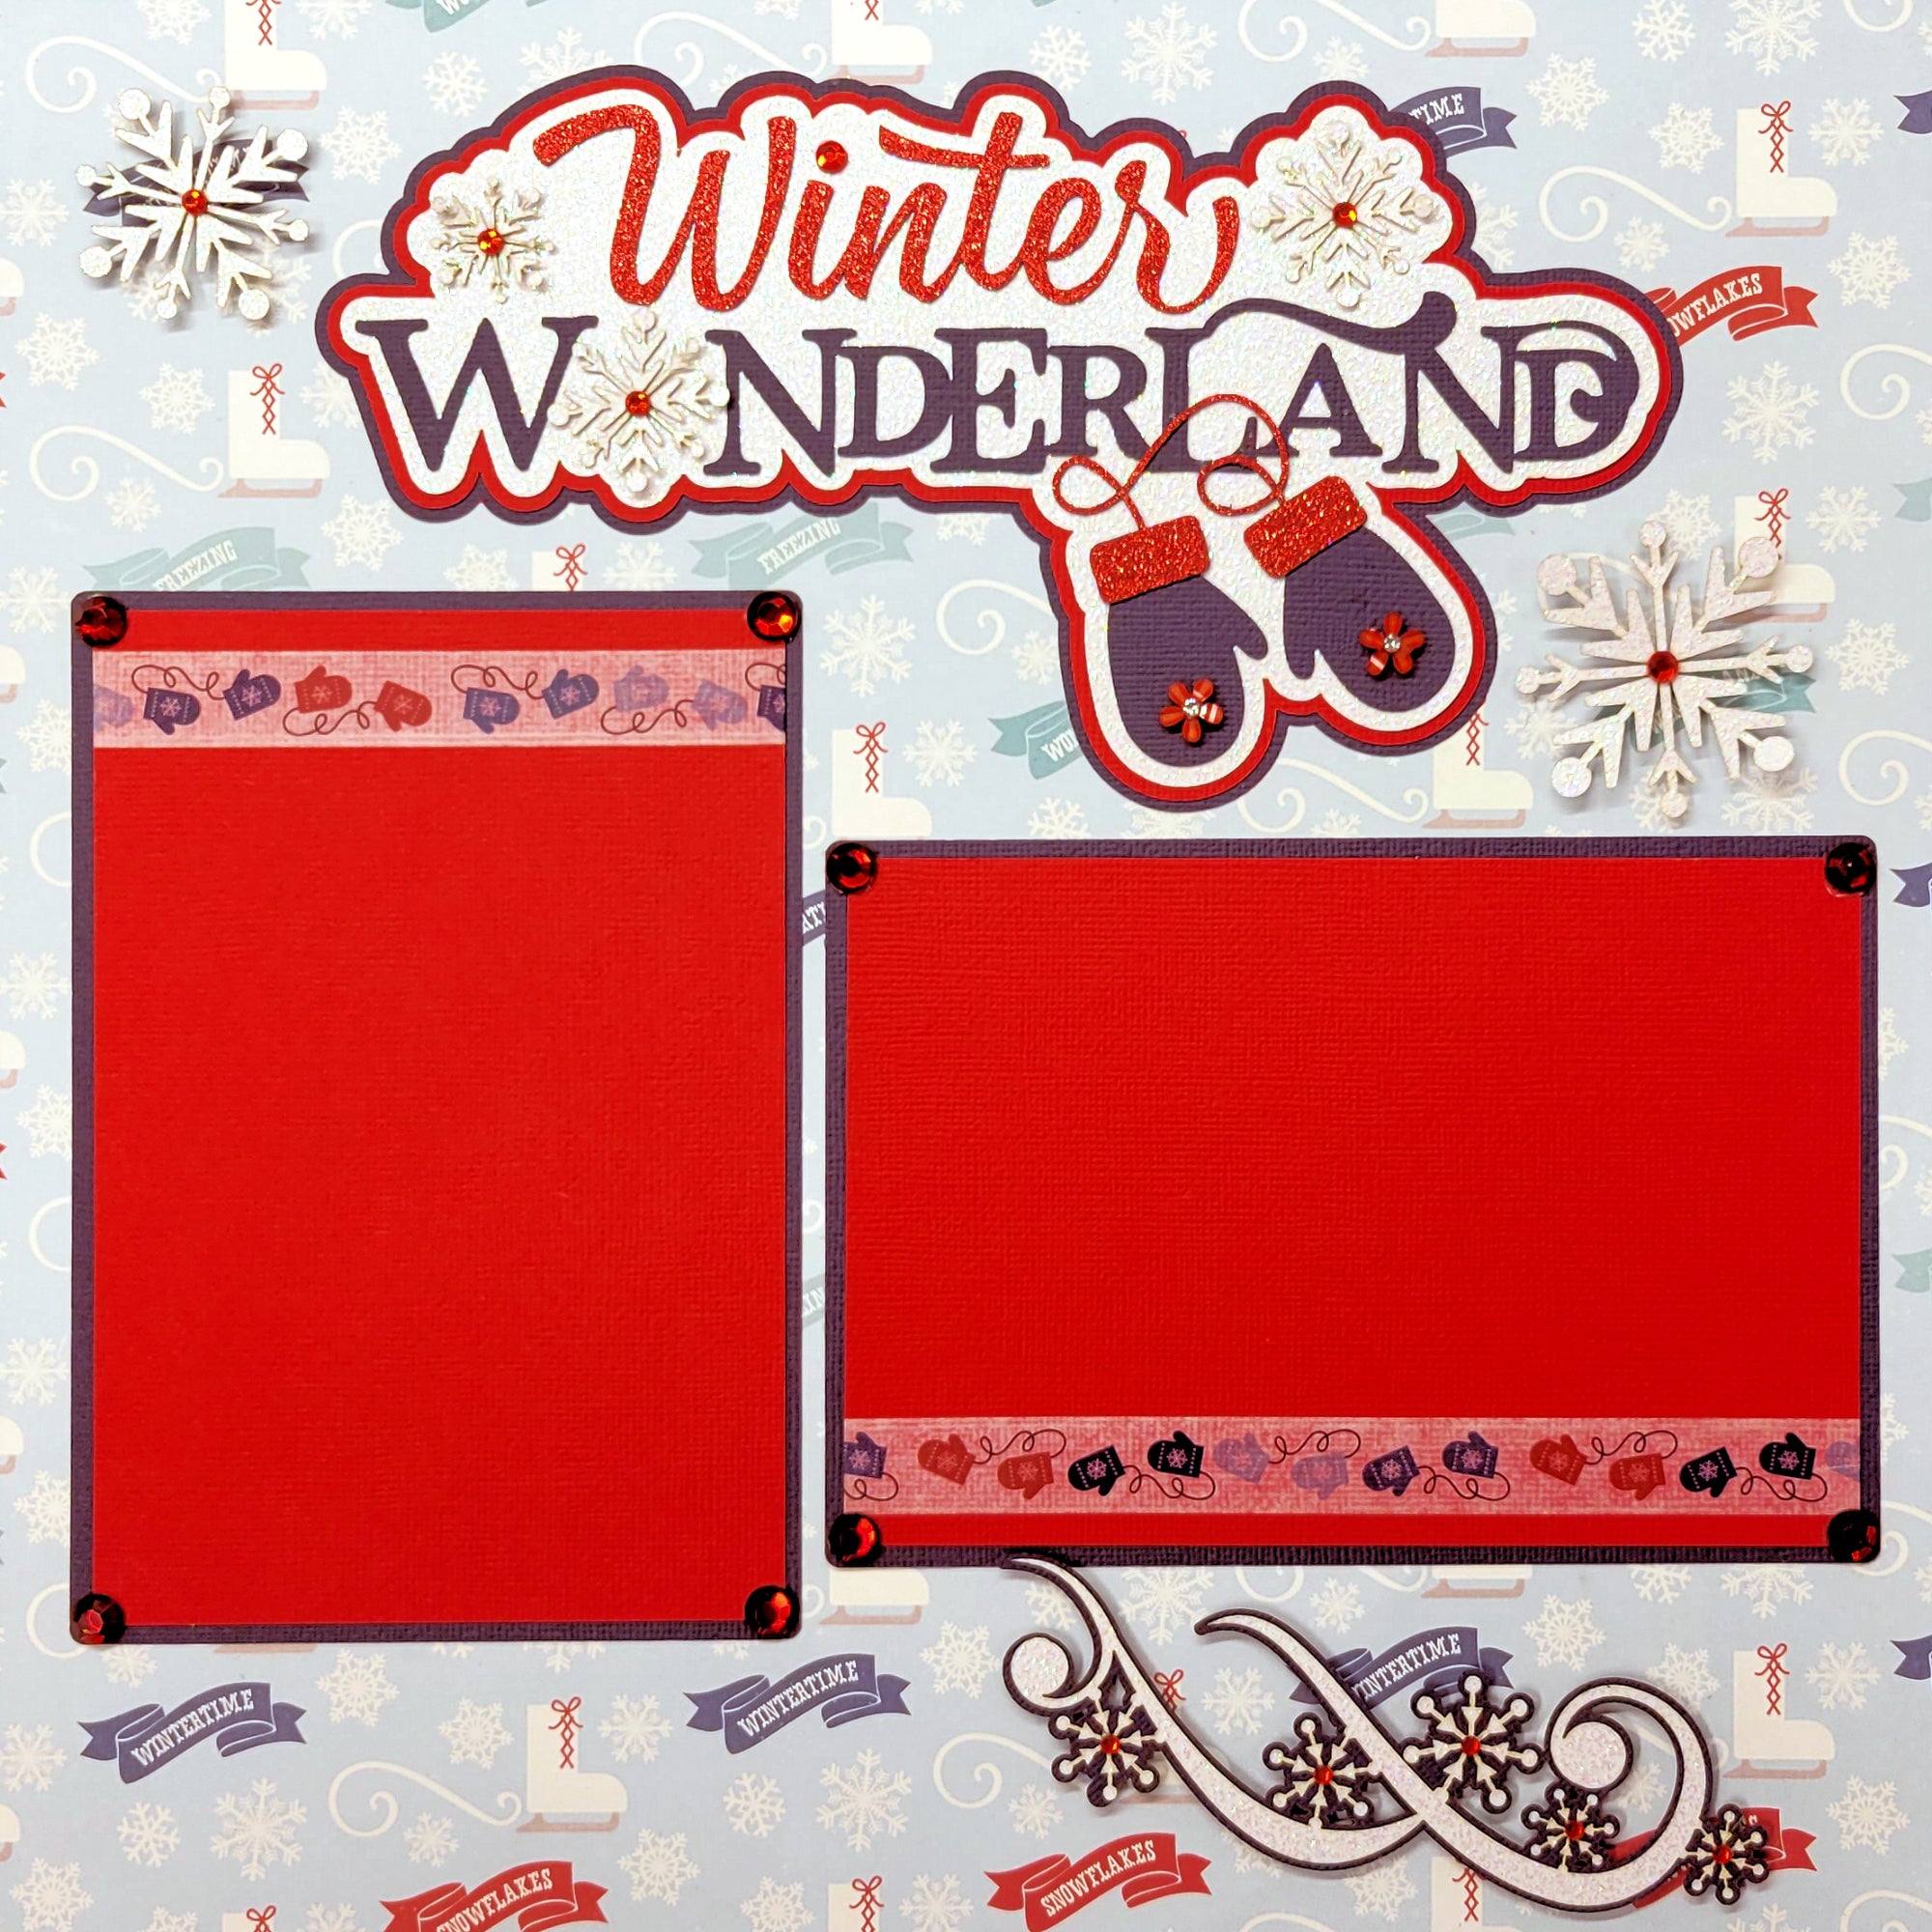 Winter Wonderland (2) - 12 x 12 Pages, Fully-Assembled & Hand-Crafted 3D Scrapbook Premade by SSC Designs